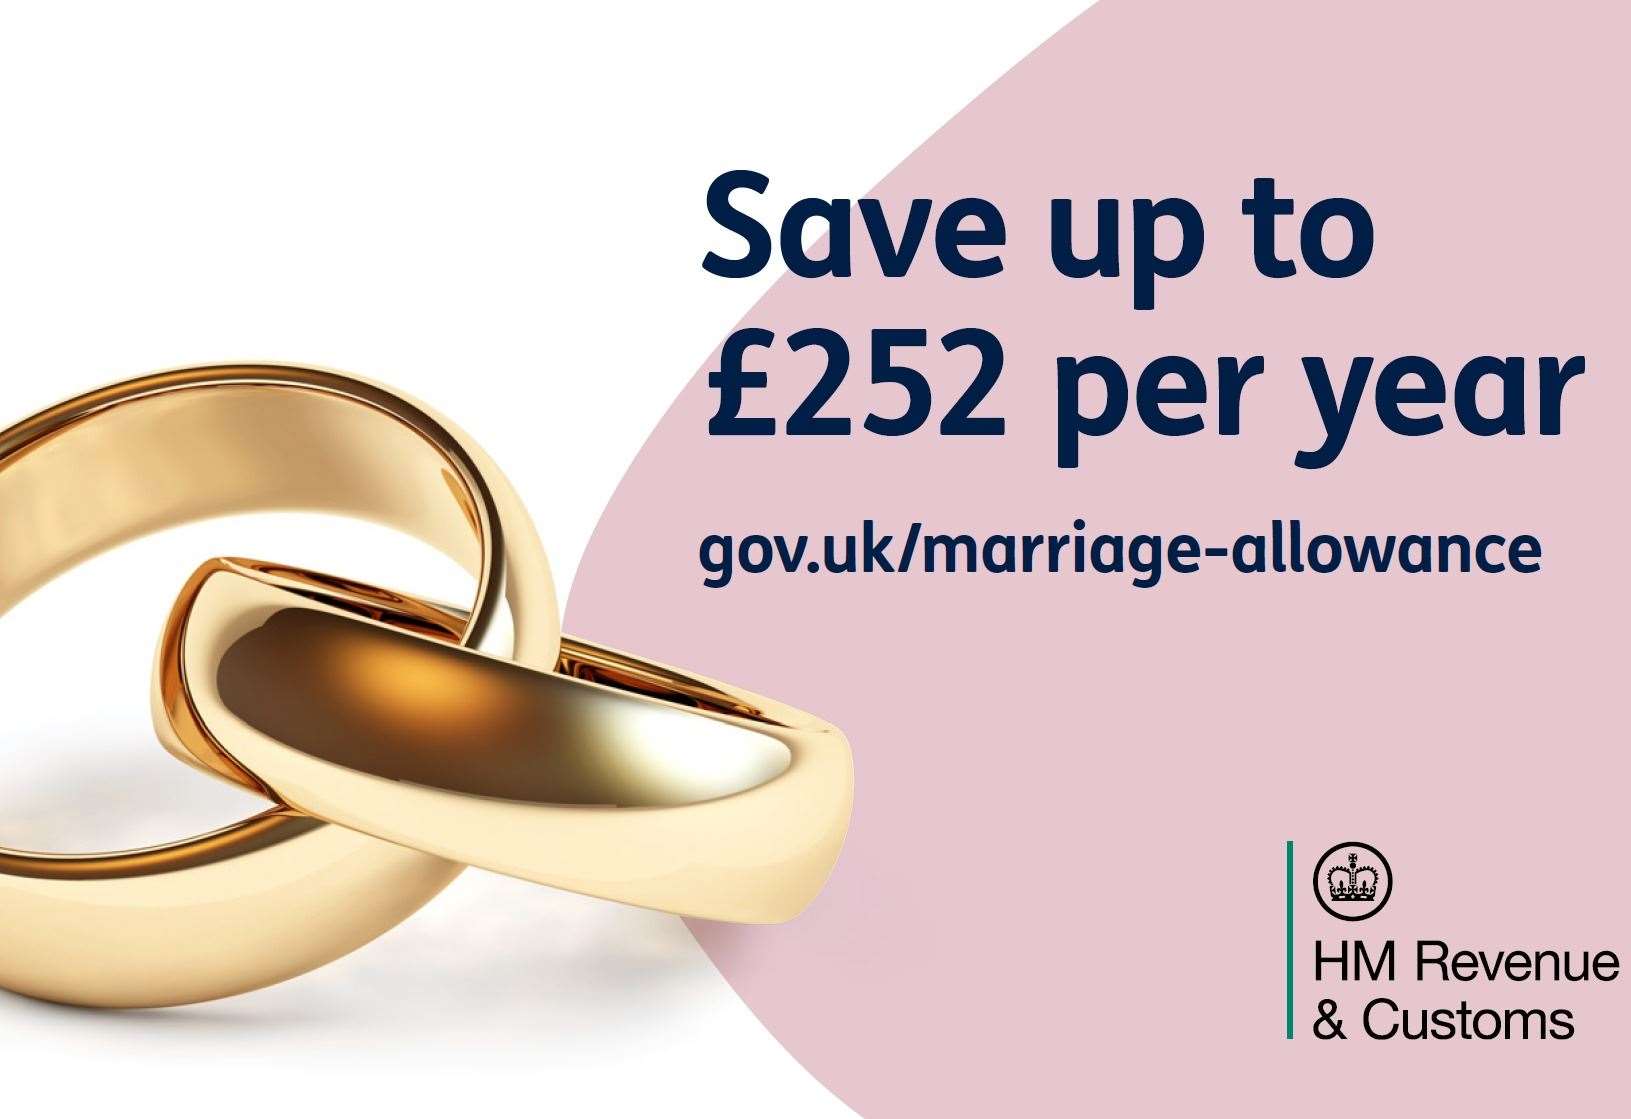 Hmrc Marriage Tax Refund Contact Number